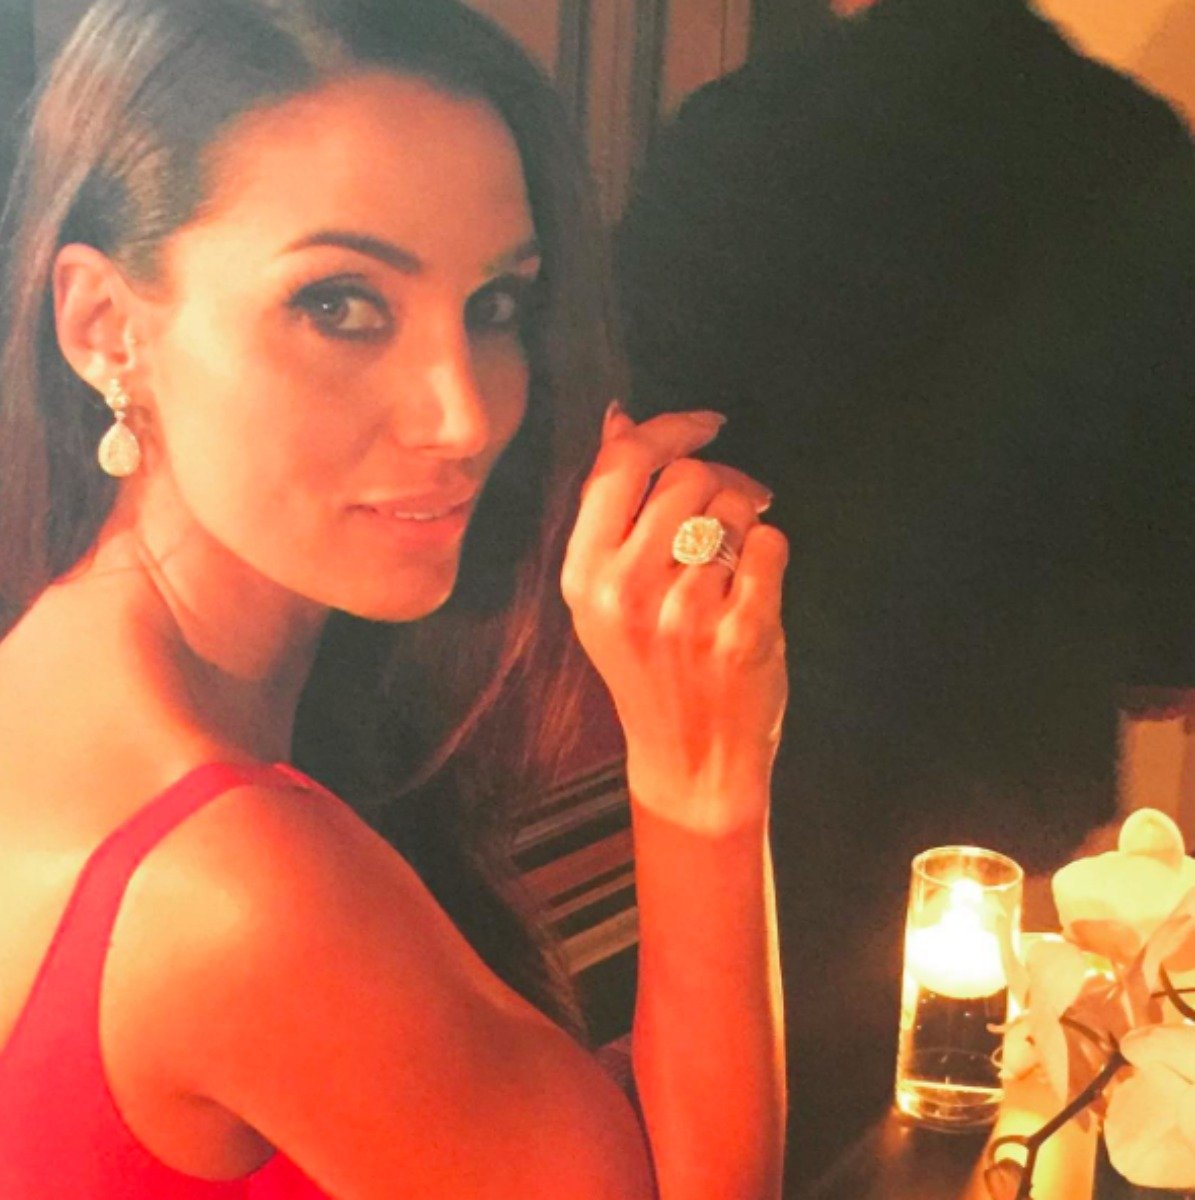 Snezana Markoski engagement ring embroiled in legal drama.